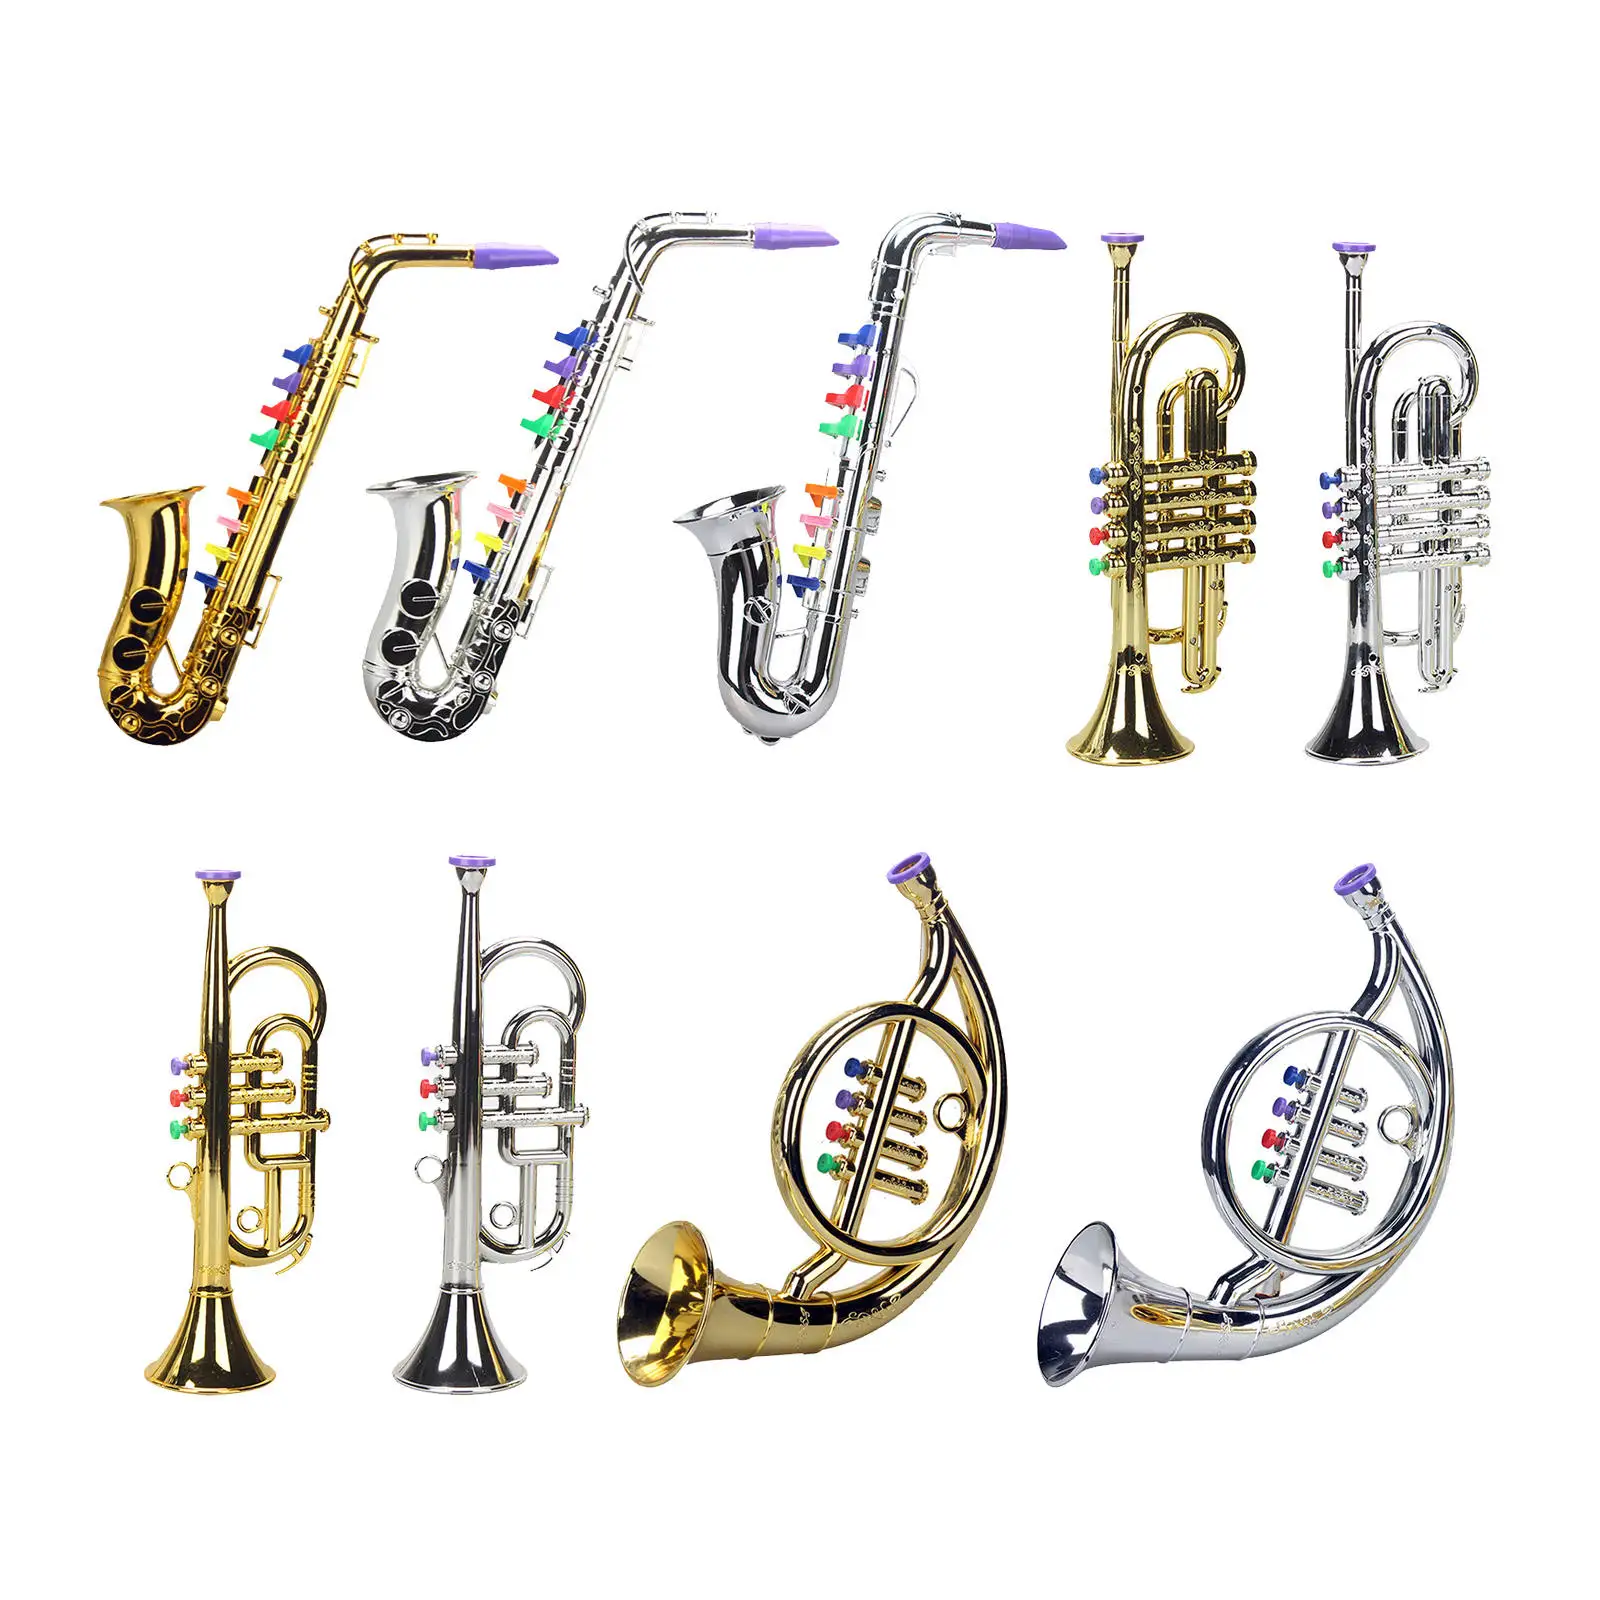 Gold Preschool Newmind Musical 8 Notes ABS Metallic Toy Mini Play Props Simulation Saxophone Instruments for Party Children Ages 3 